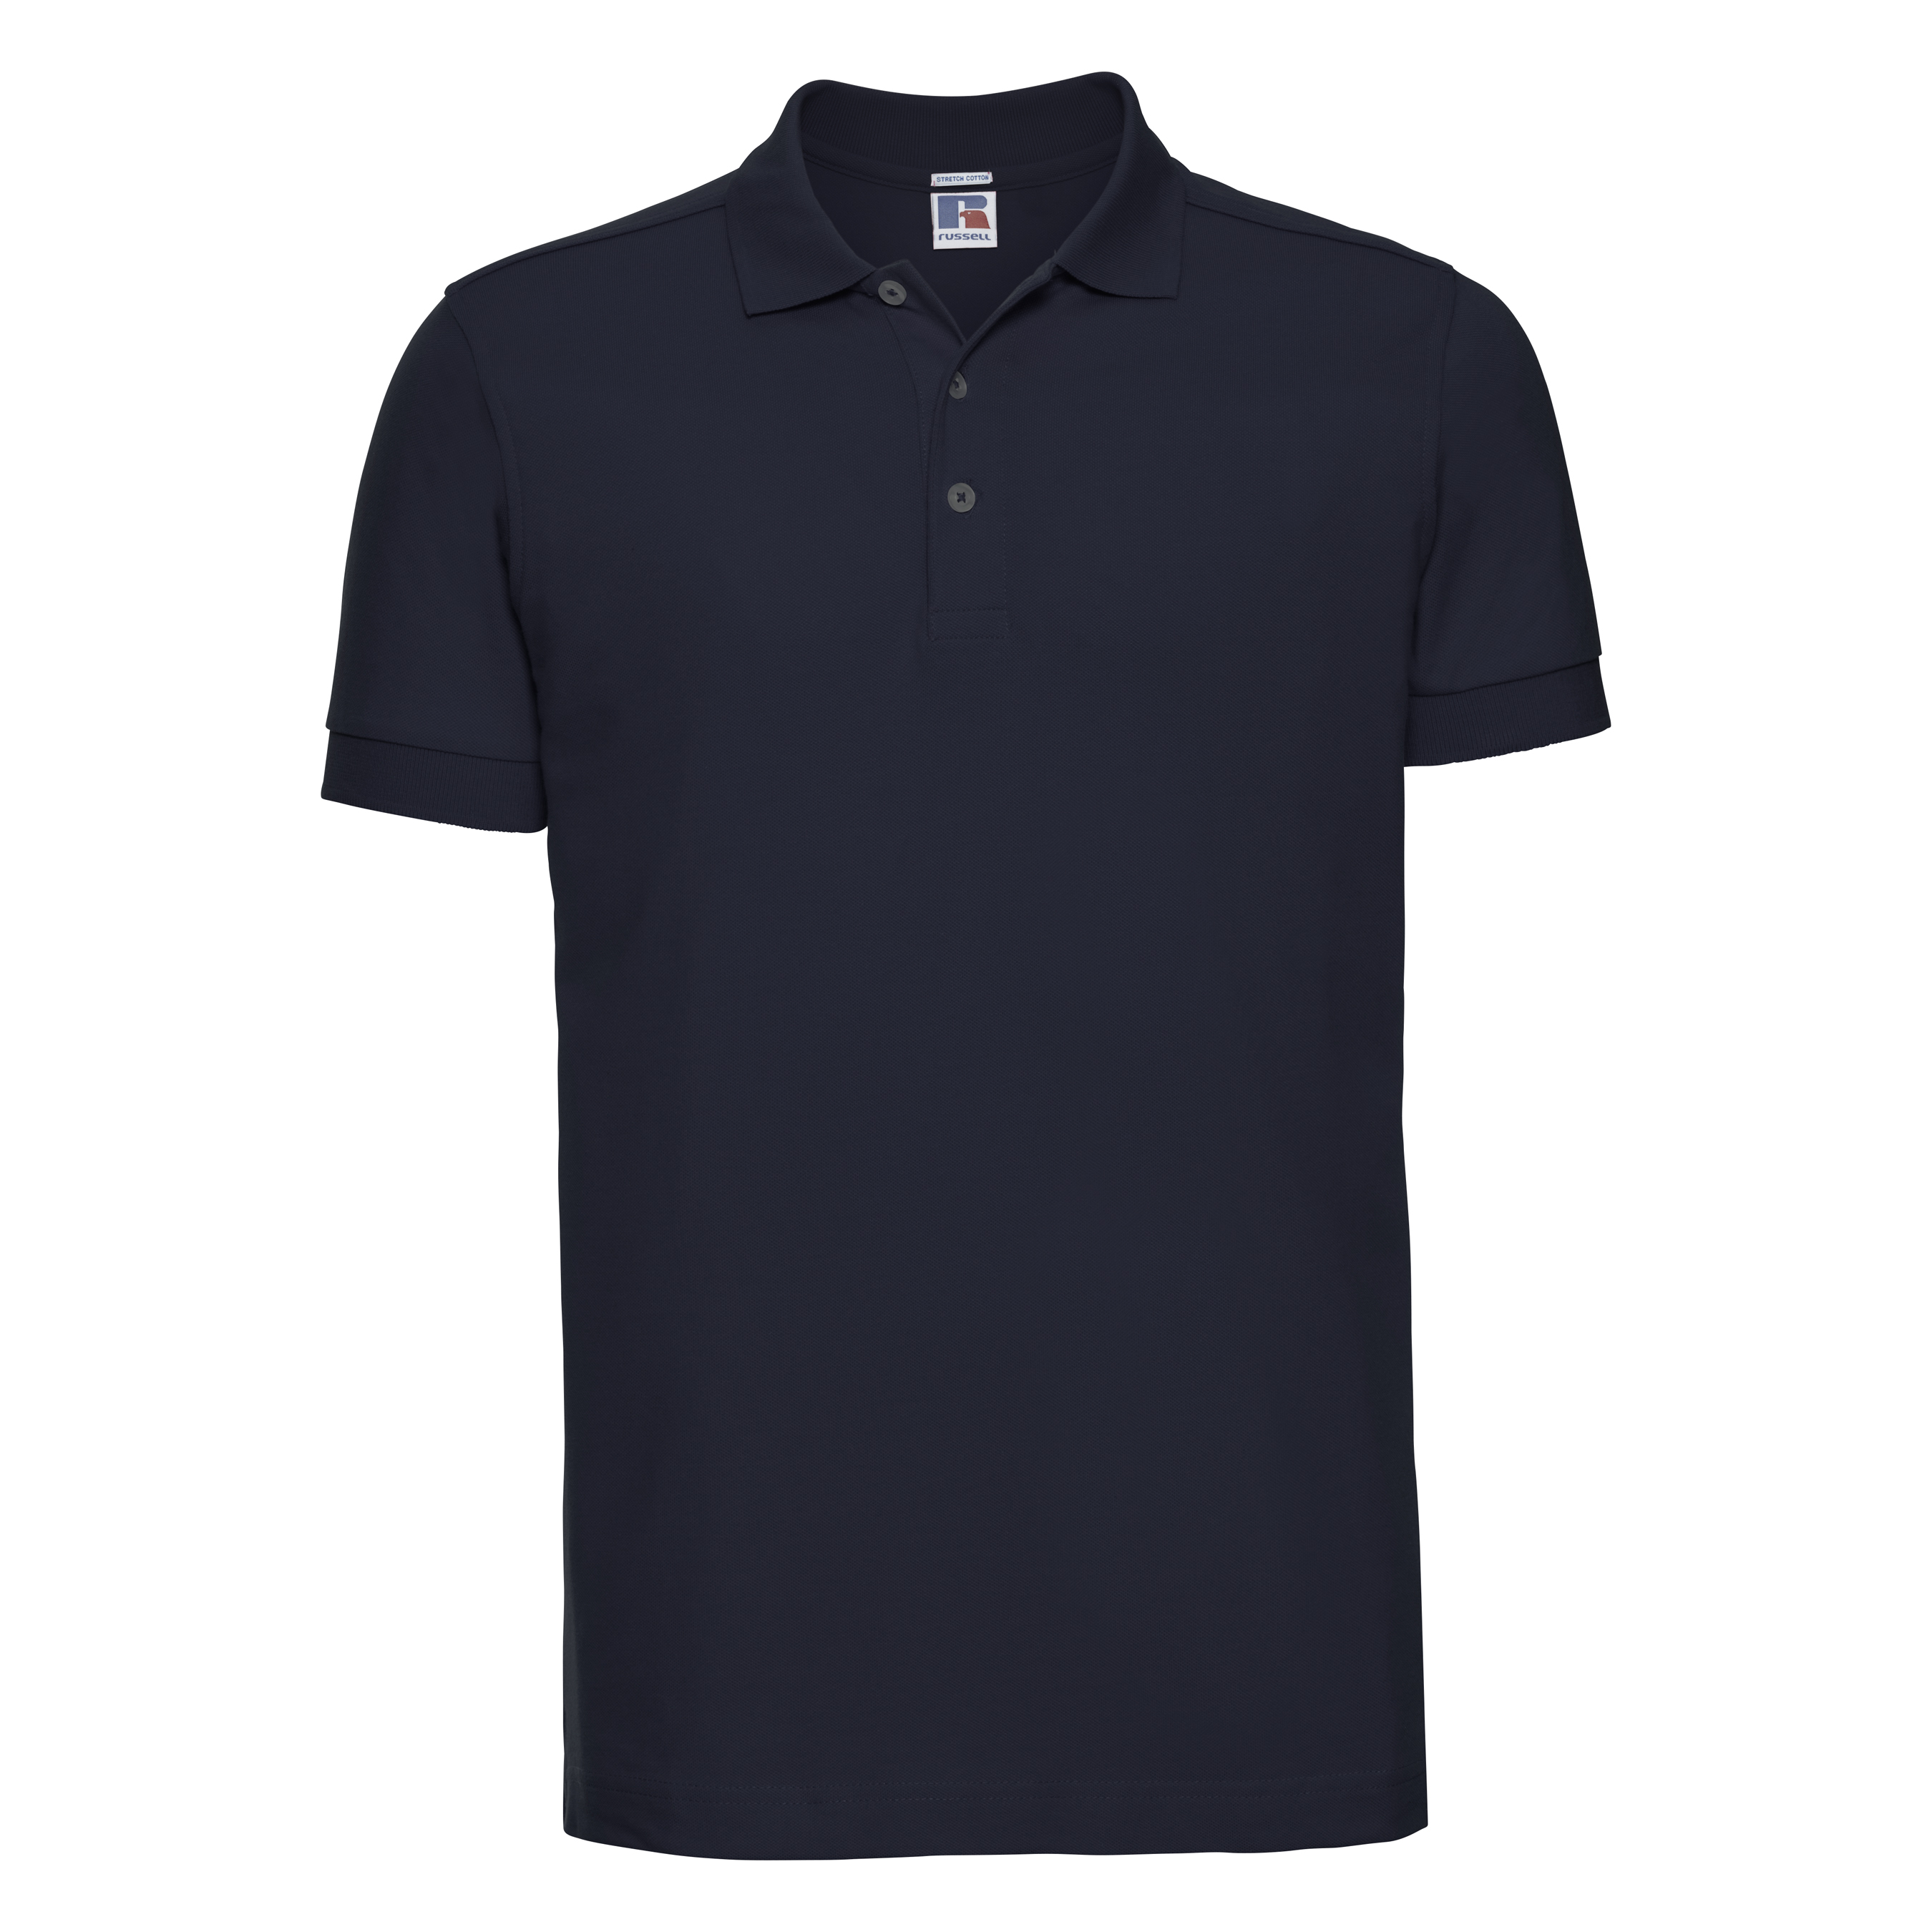 ax-httpswebsystems.s3.amazonaws.comtmp_for_downloadrussell-stretch-polo-french-navy.jpg